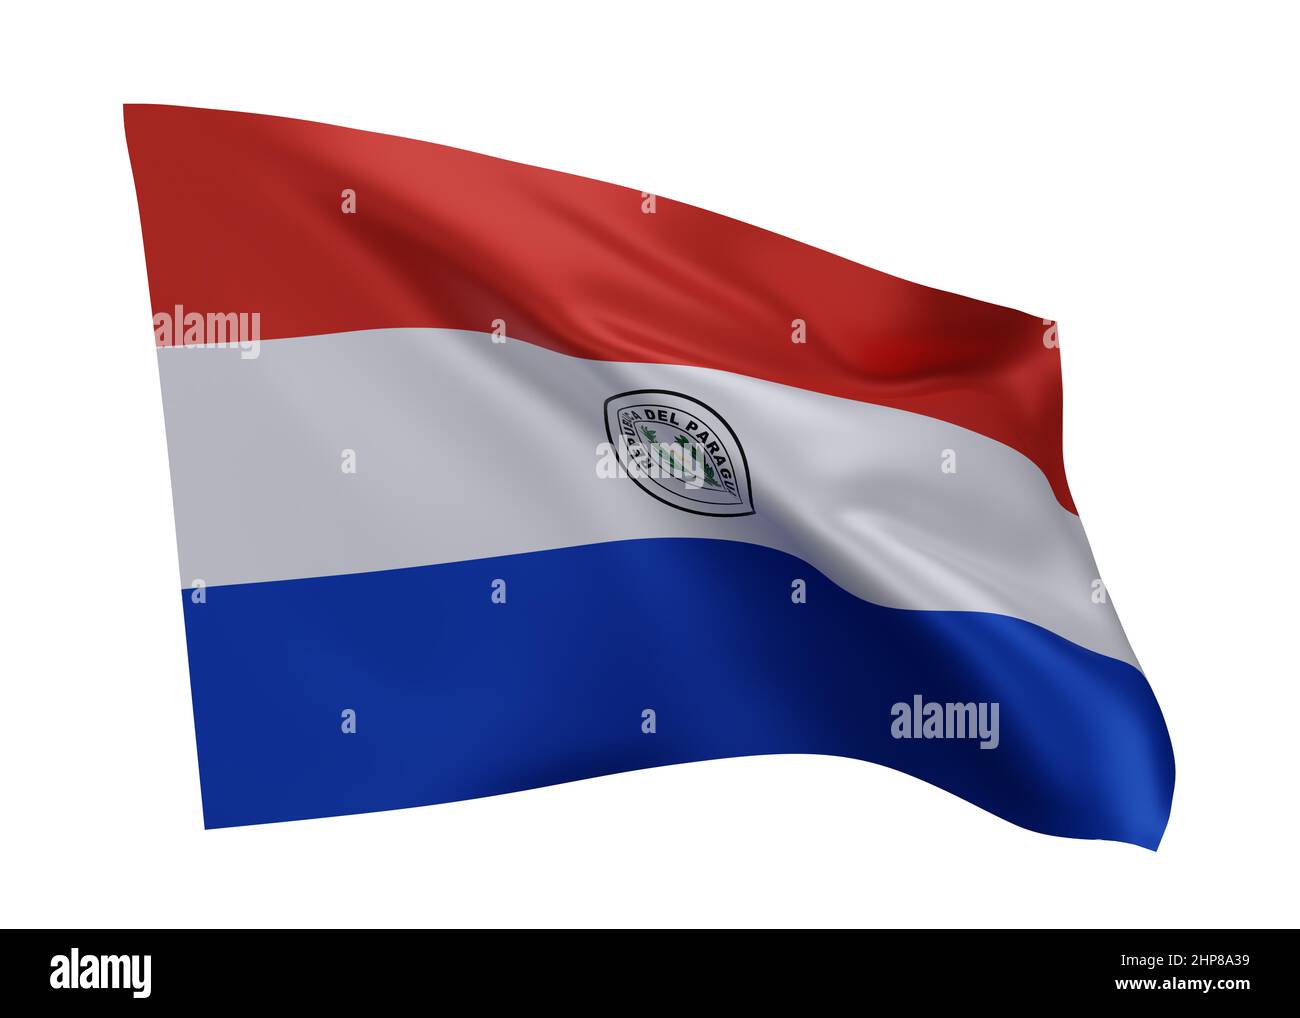 3d illustration flag of Paraguay. Paraguayan high resolution flag isolated against white background. 3d rendering Stock Photo